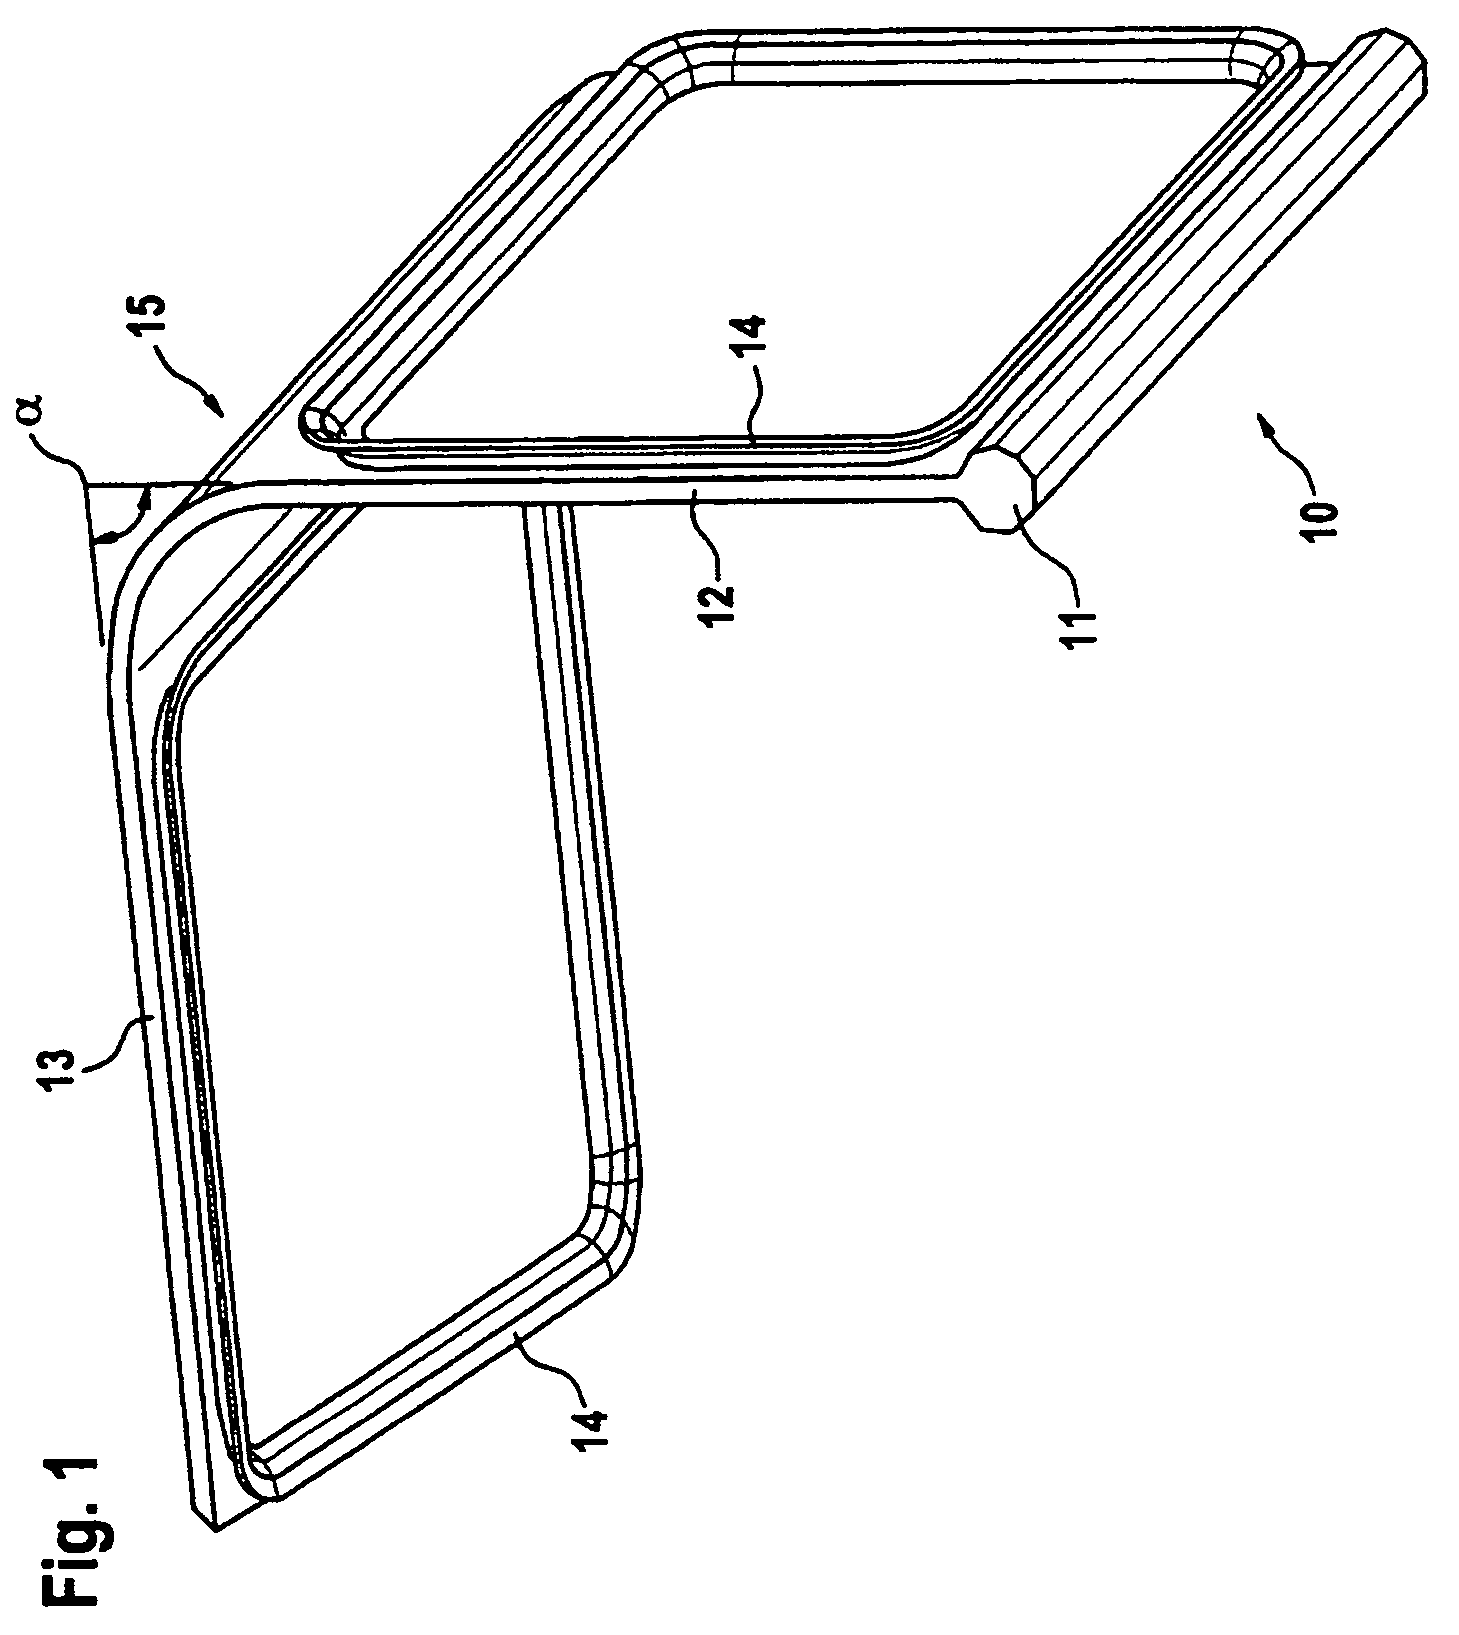 Air channel flap and flow guiding device